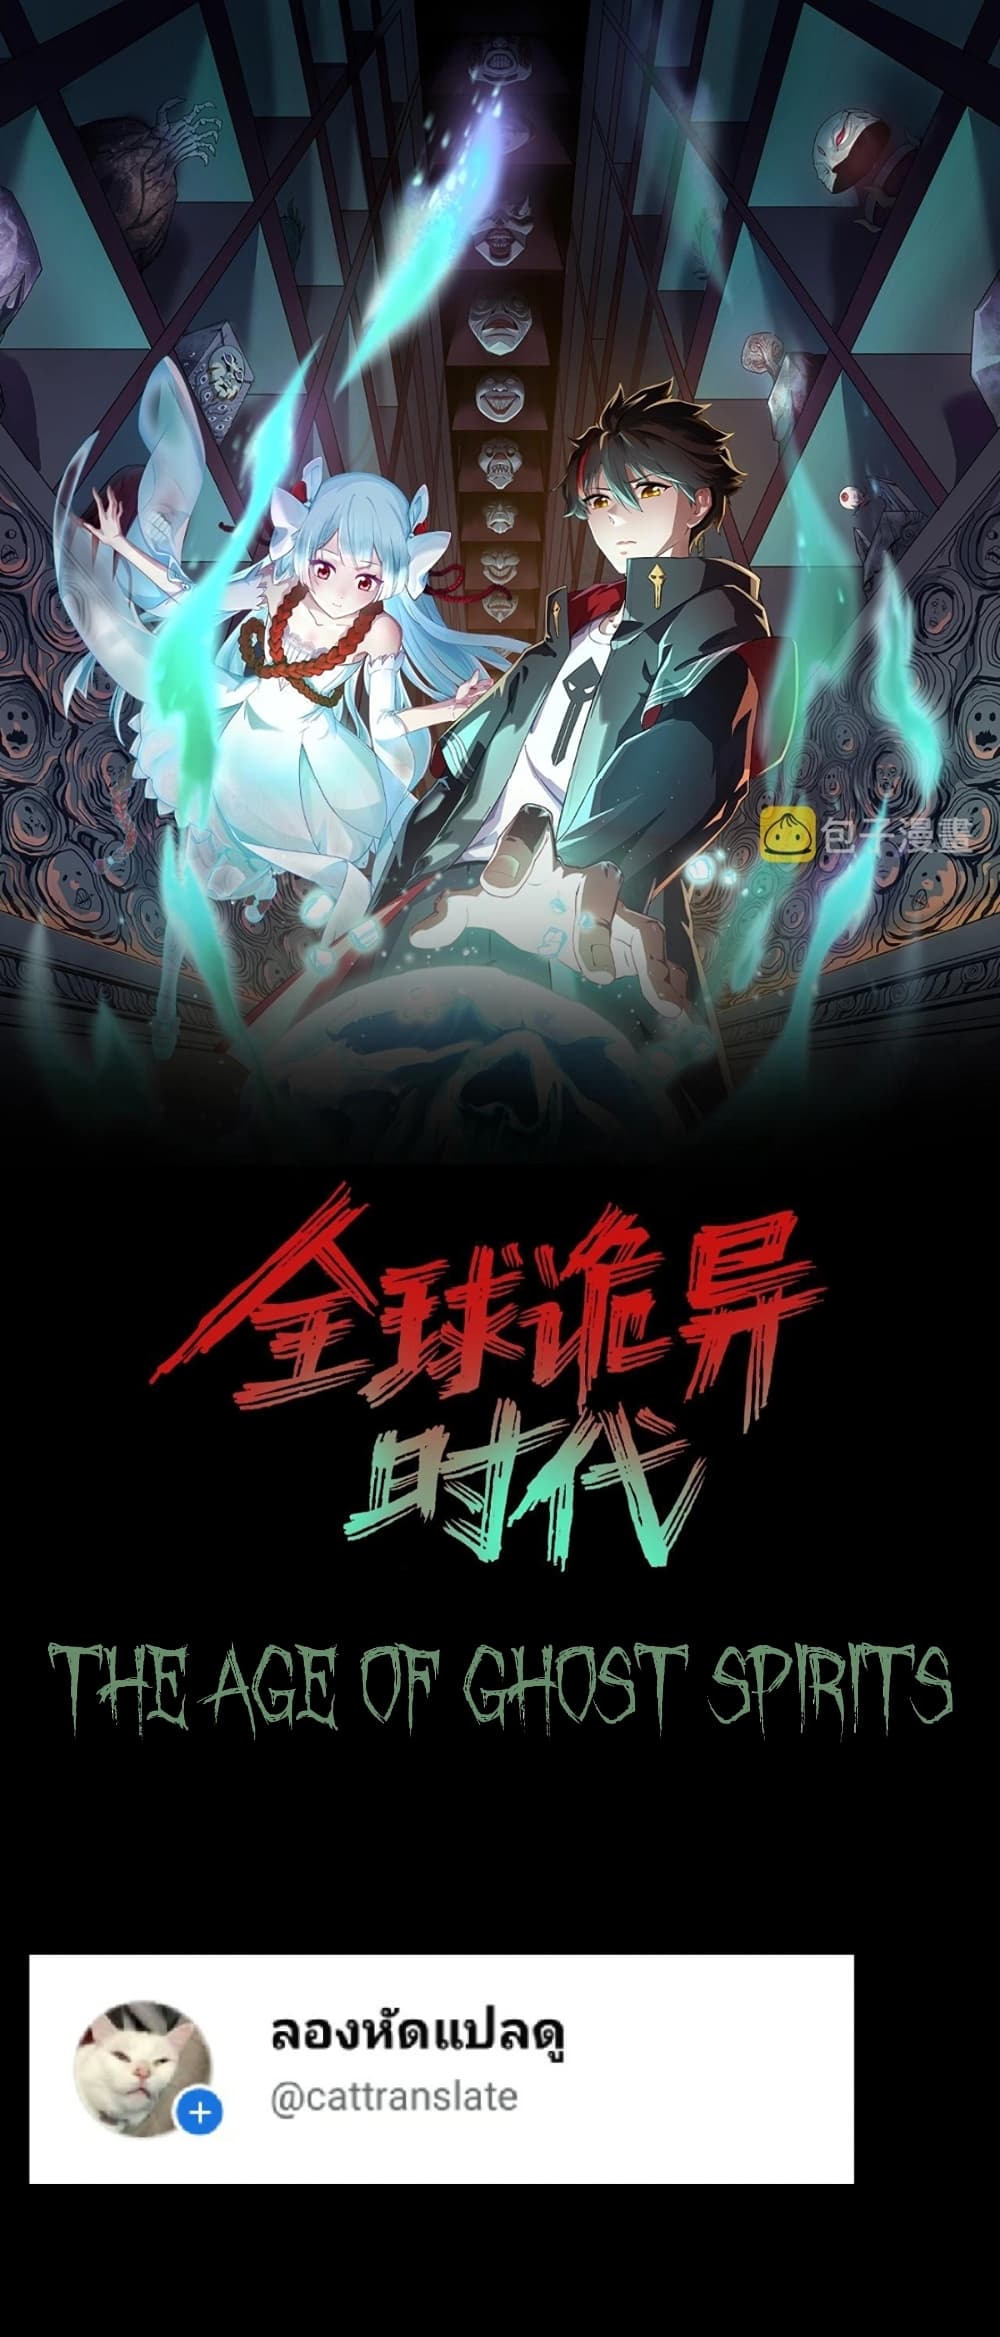 The Age of Ghost Spirits à¸à¸­à¸à¸à¸µà¹ 8 (1)